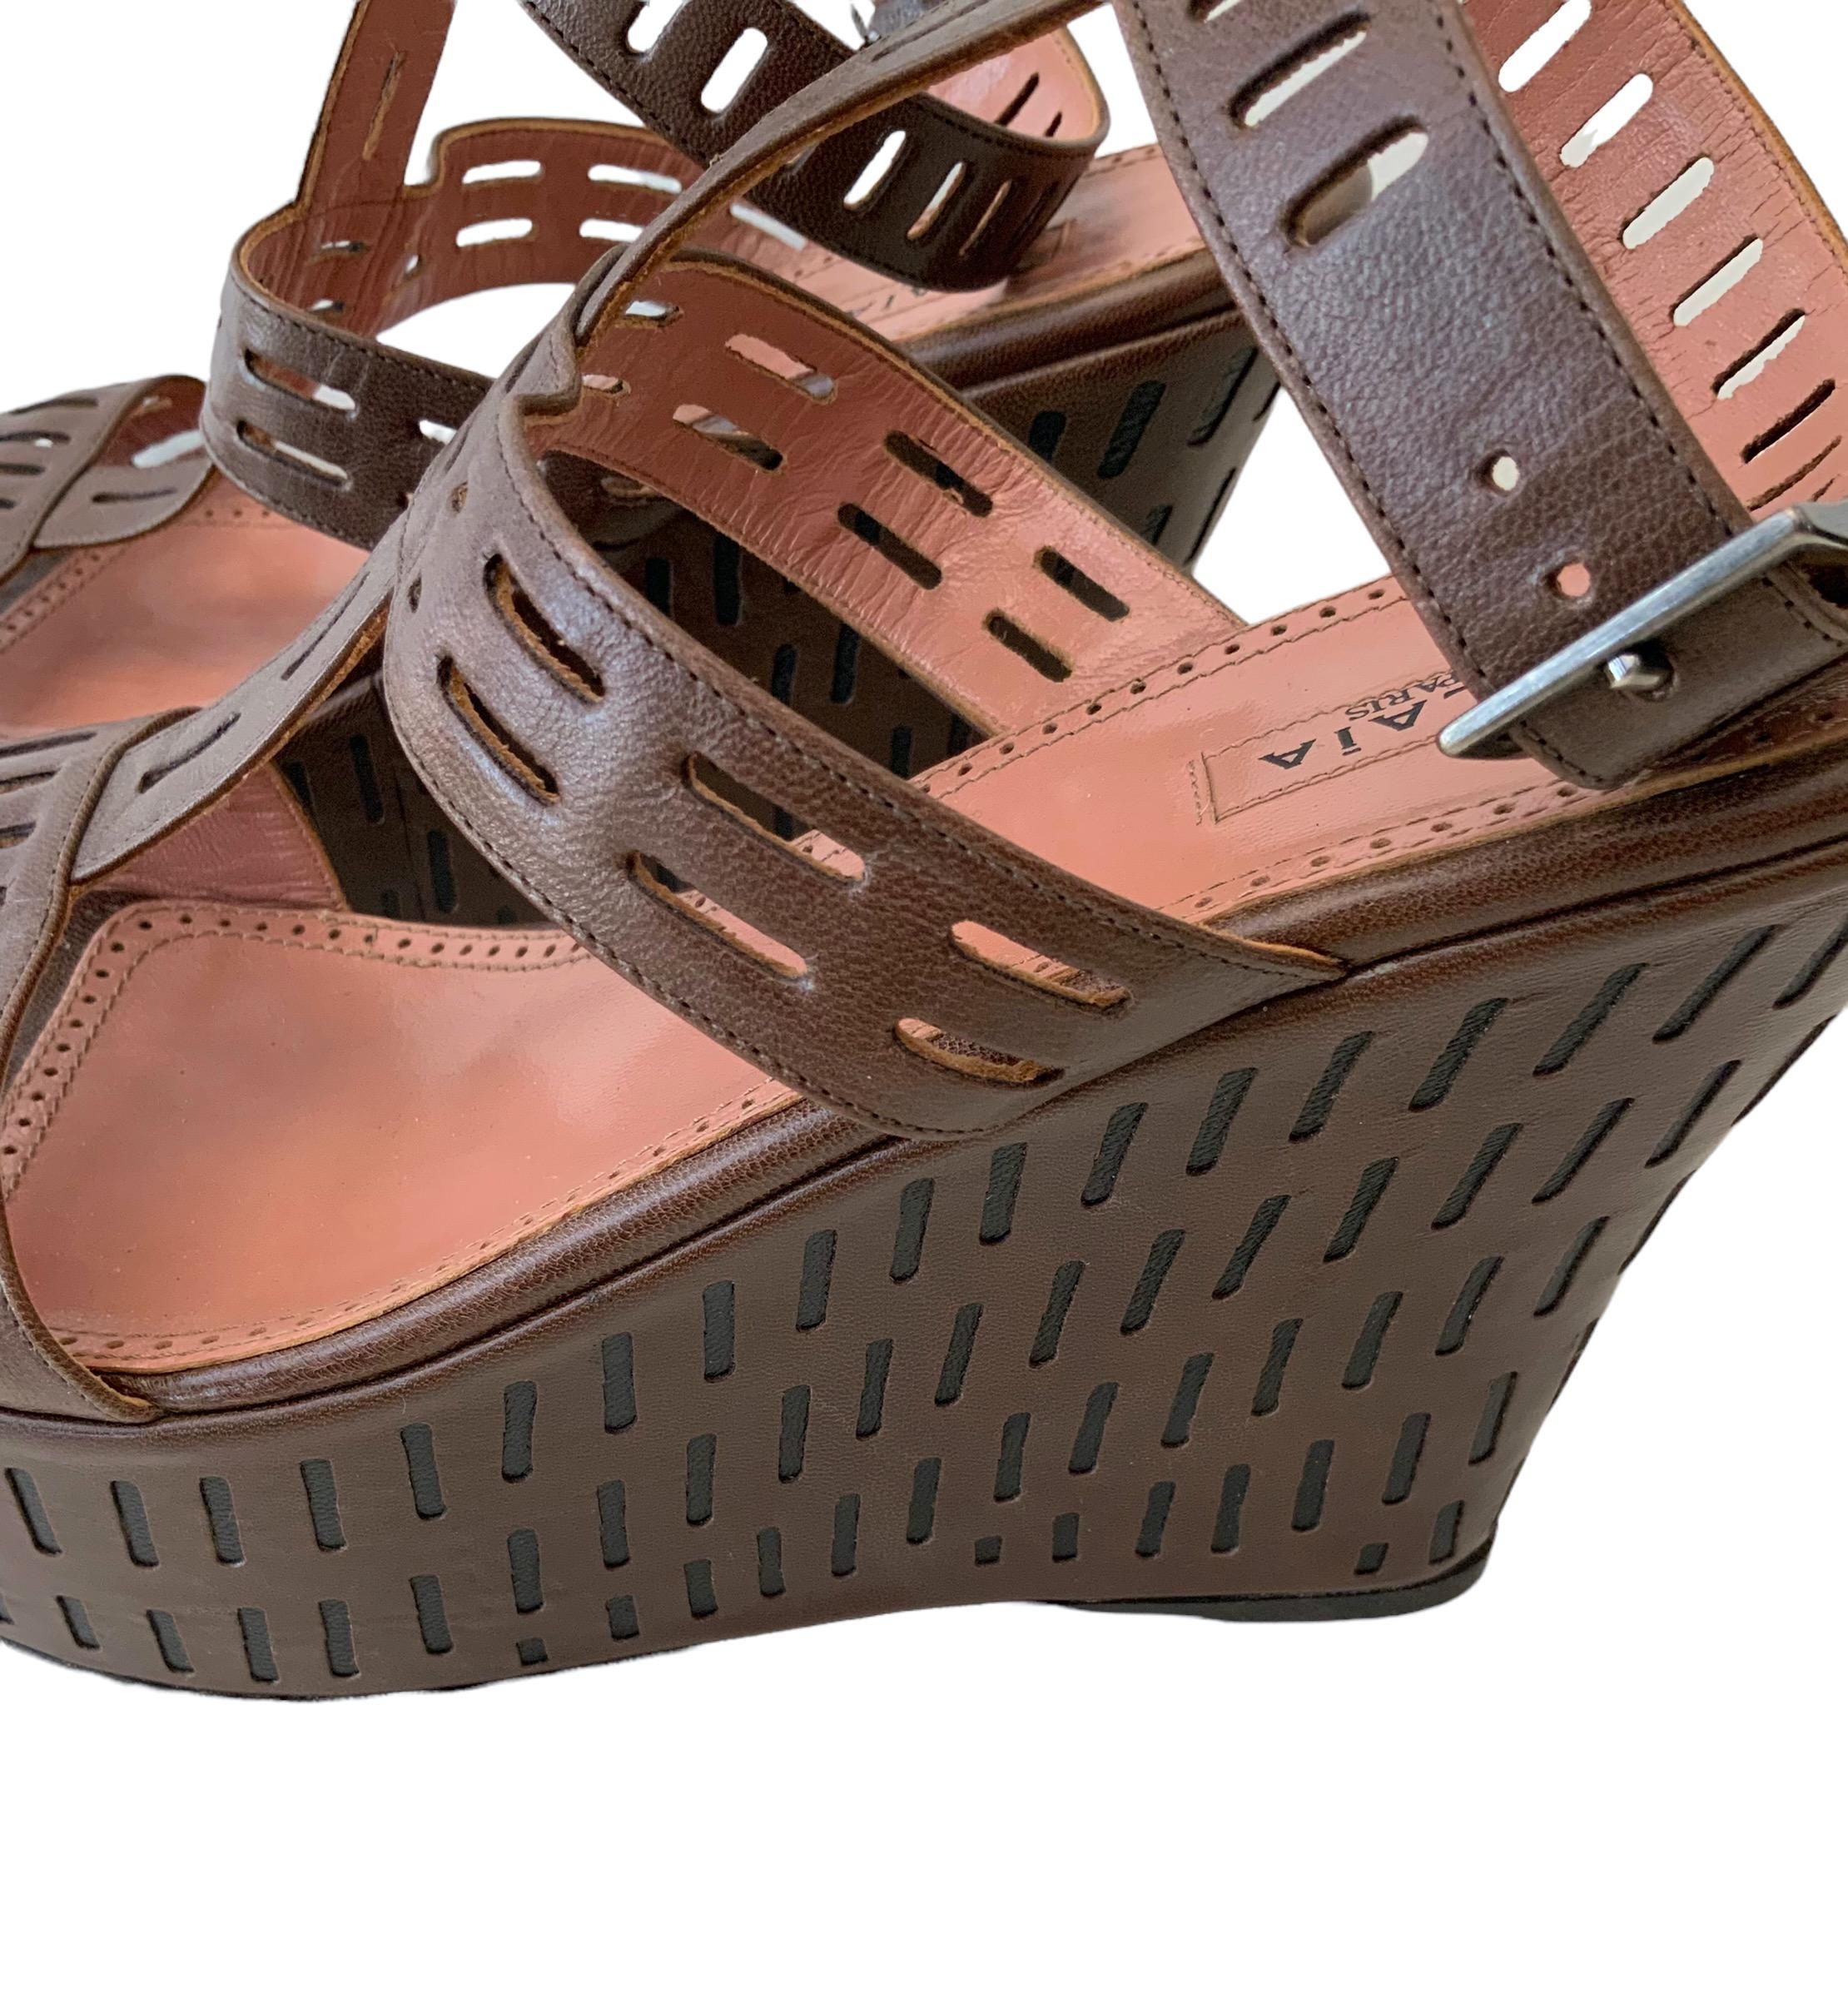 Beautiful wedge platform sandals from the Alaïa Runway collection.
Pre-owned but new, they feature leather cut-out straps / T-Ankle strap and leather cut-out design on paltform.
A must for this summer !

Material: Leather
Color: Brown
Sole: Black